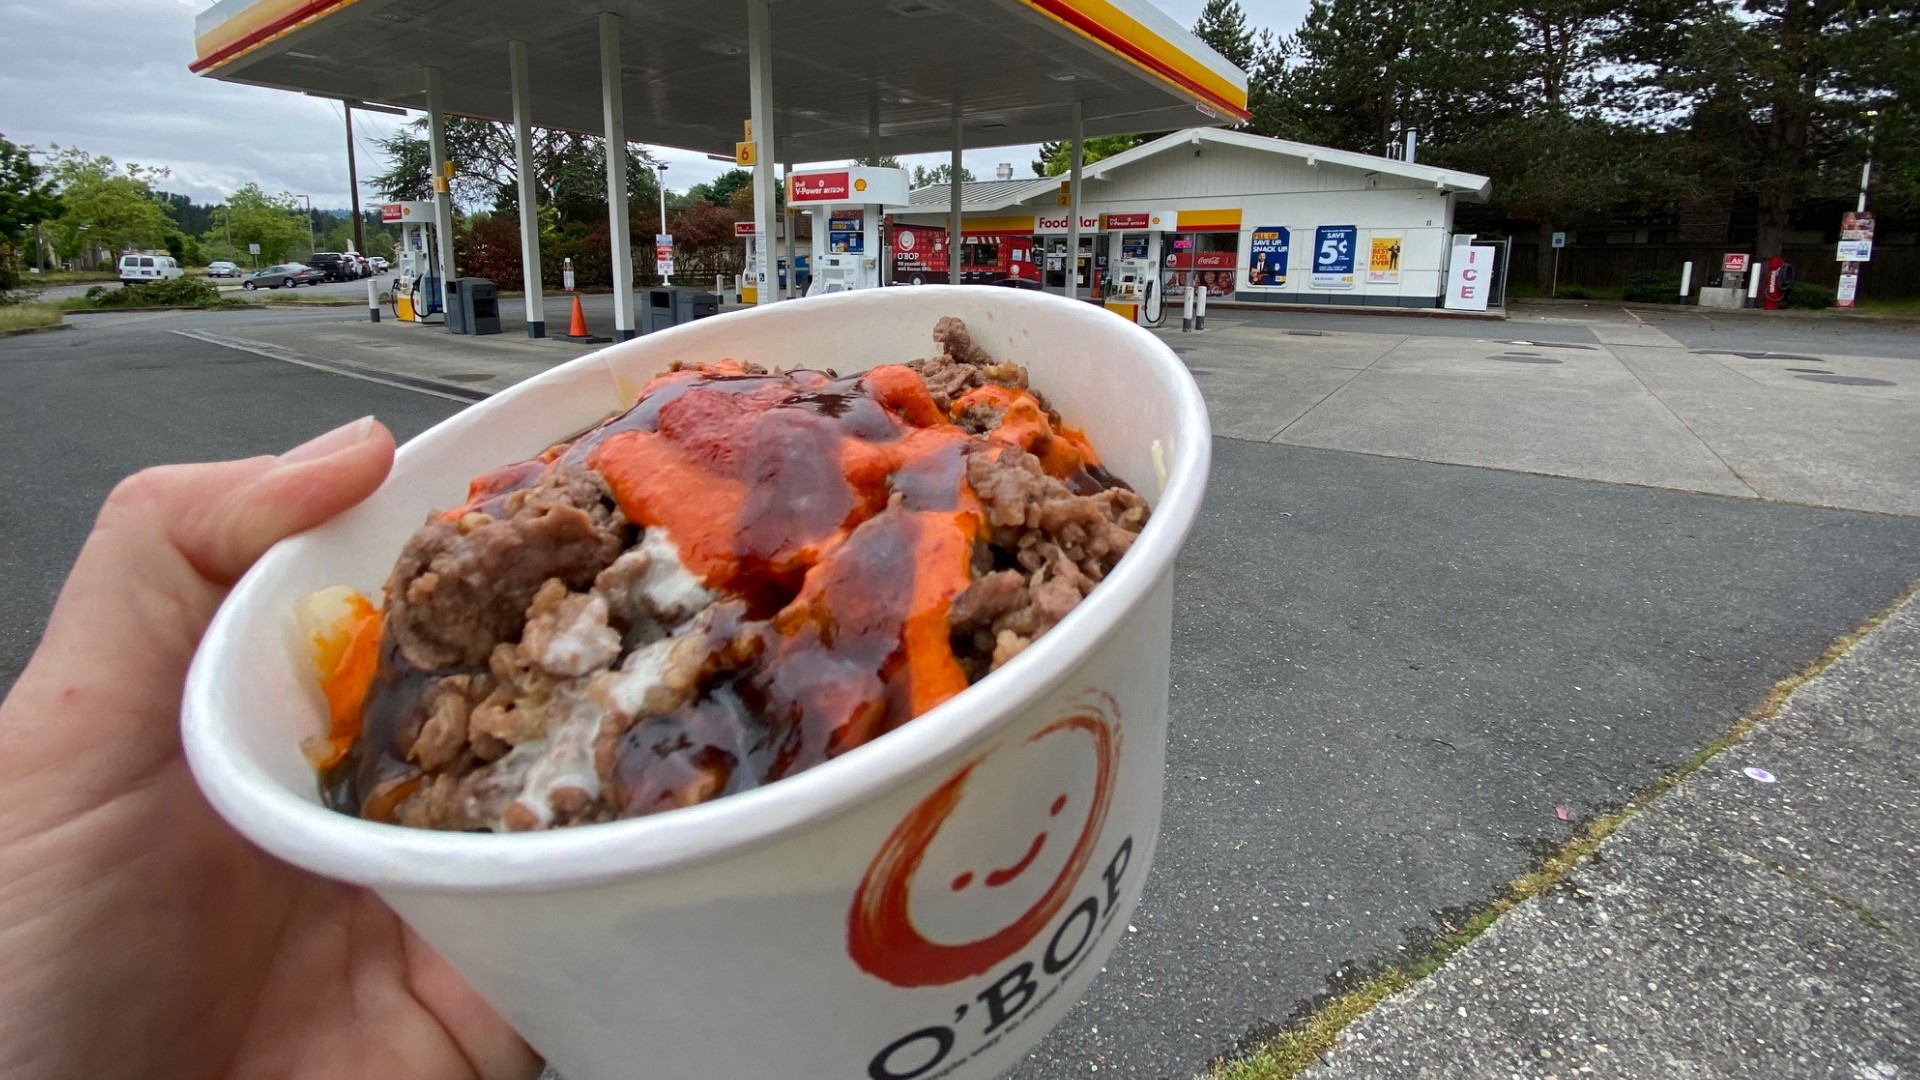 Grab a rice bowl and fill up while you fill up! #k5evening